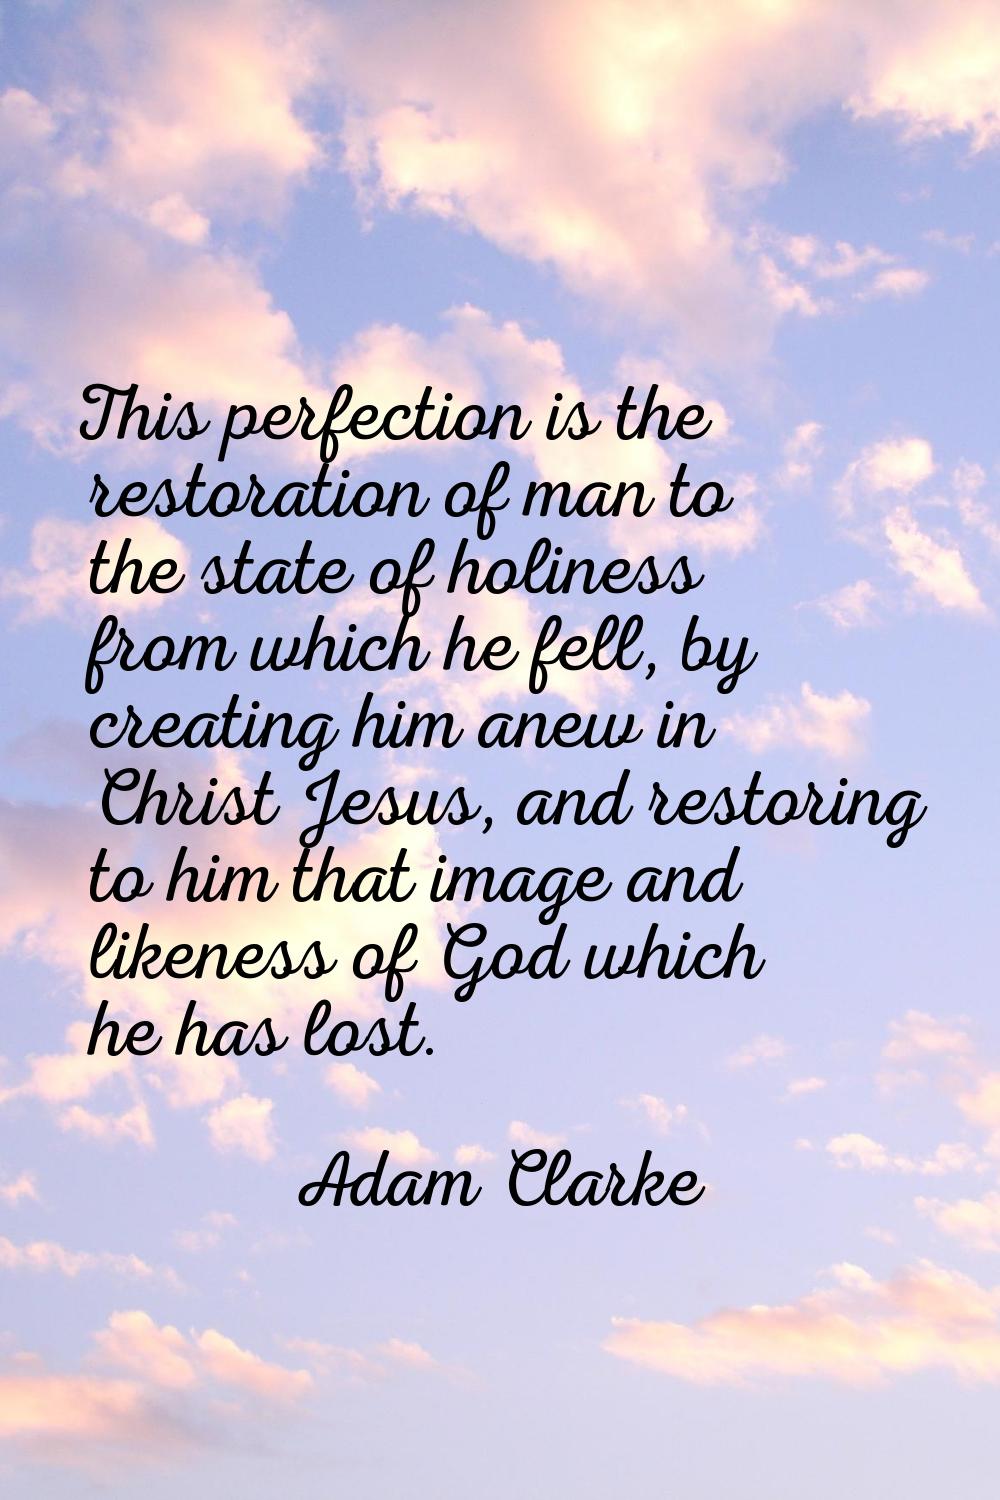 This perfection is the restoration of man to the state of holiness from which he fell, by creating 